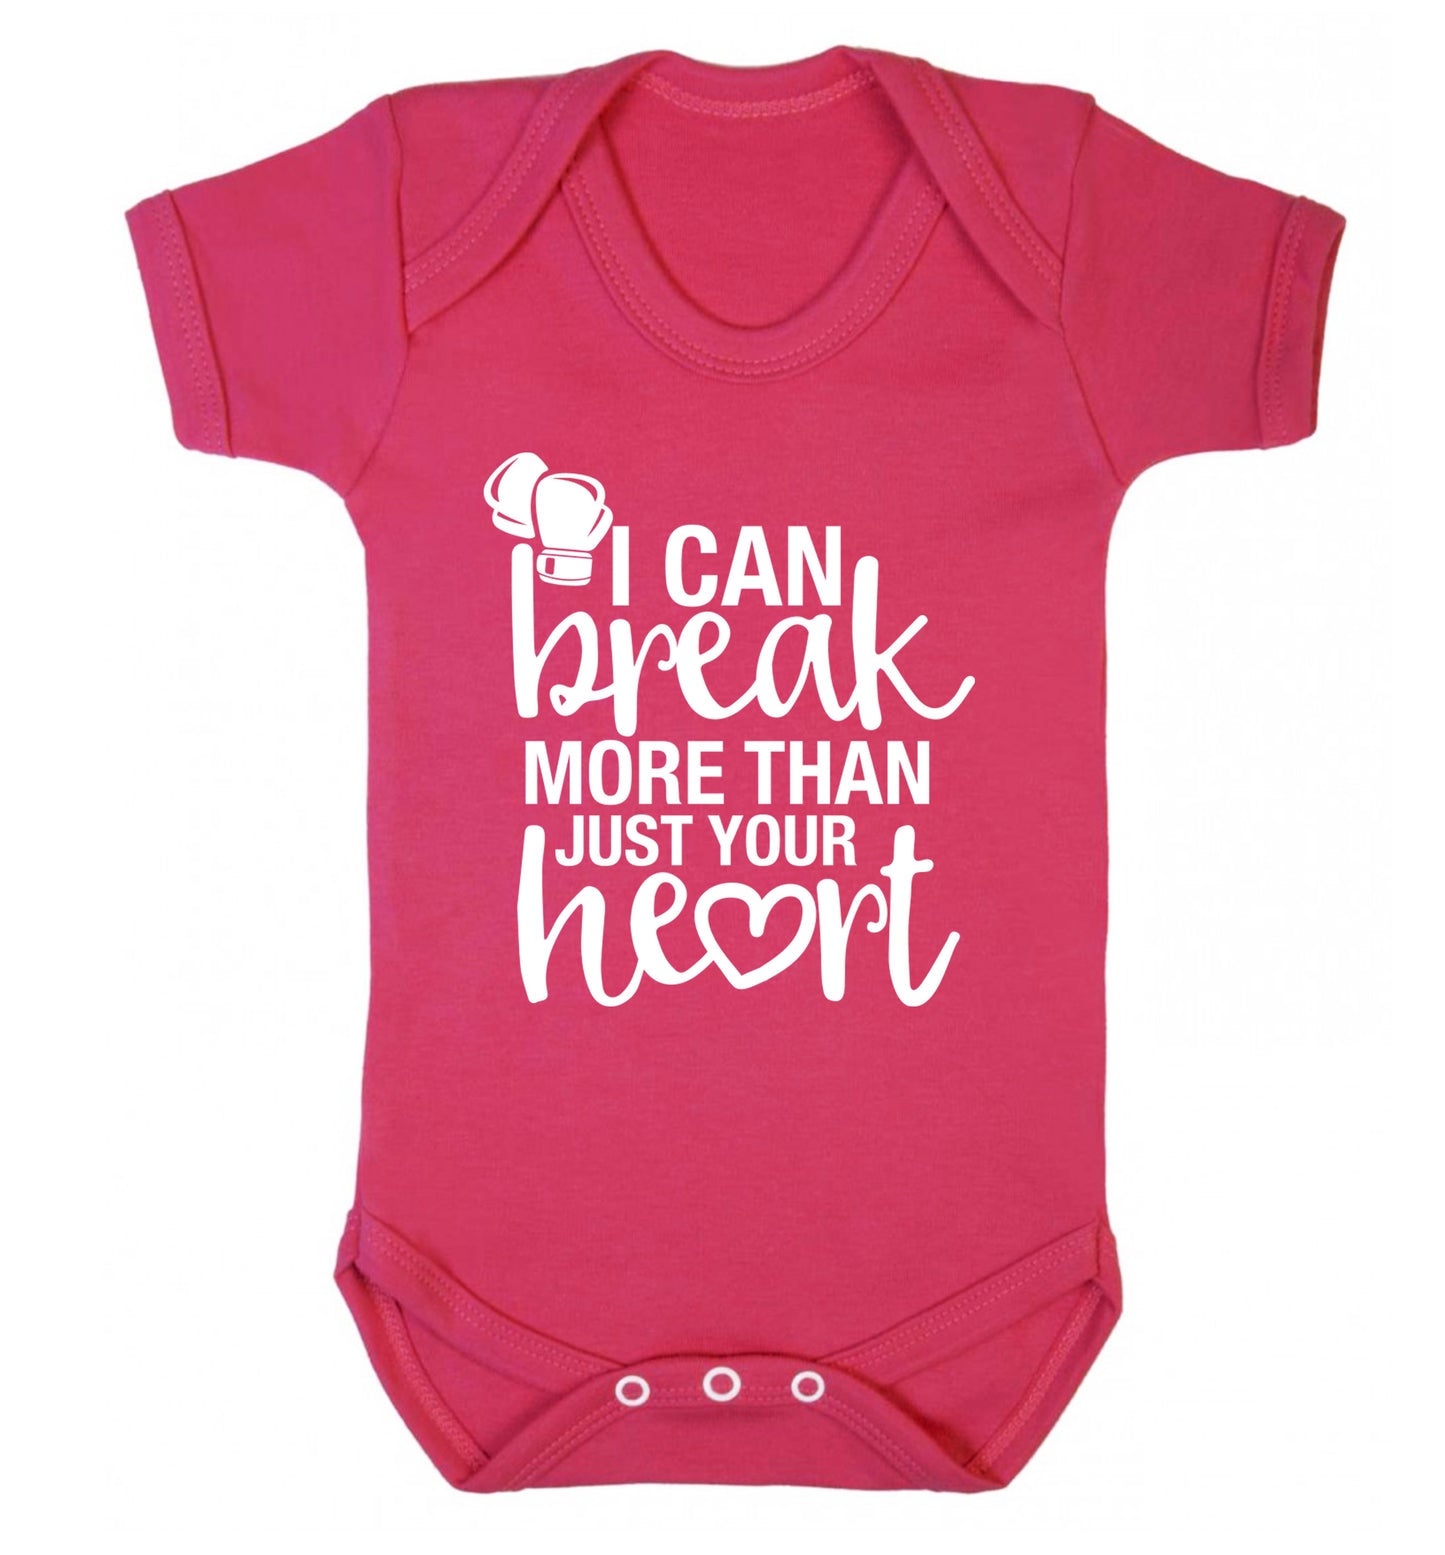 I can break more than just your heart Baby Vest dark pink 18-24 months